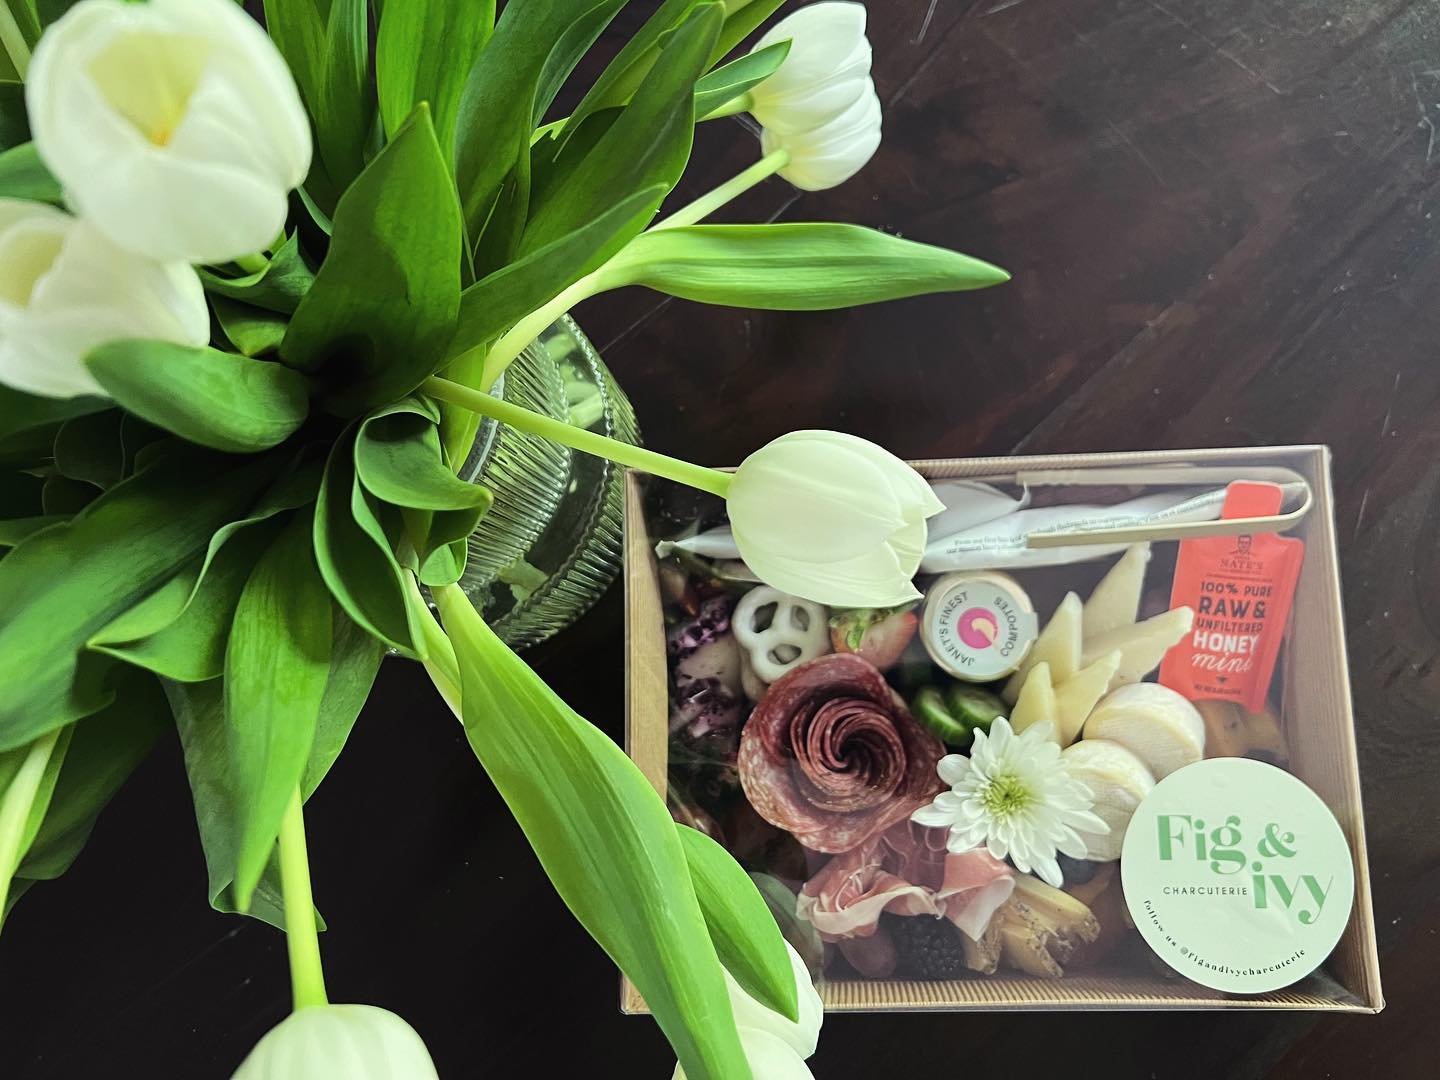 🌷 FIG &amp; IVY Mother&rsquo;s Day Giveaway 🌷

We are giving away a To-Go box 📦 to one special mama tomorrow! 

To Enter:
-Like this Photo 
-Follow @figandivycharcuterie 
-Tag 3 friends 

This giveaway starts now! Winner announced tomorrow morning